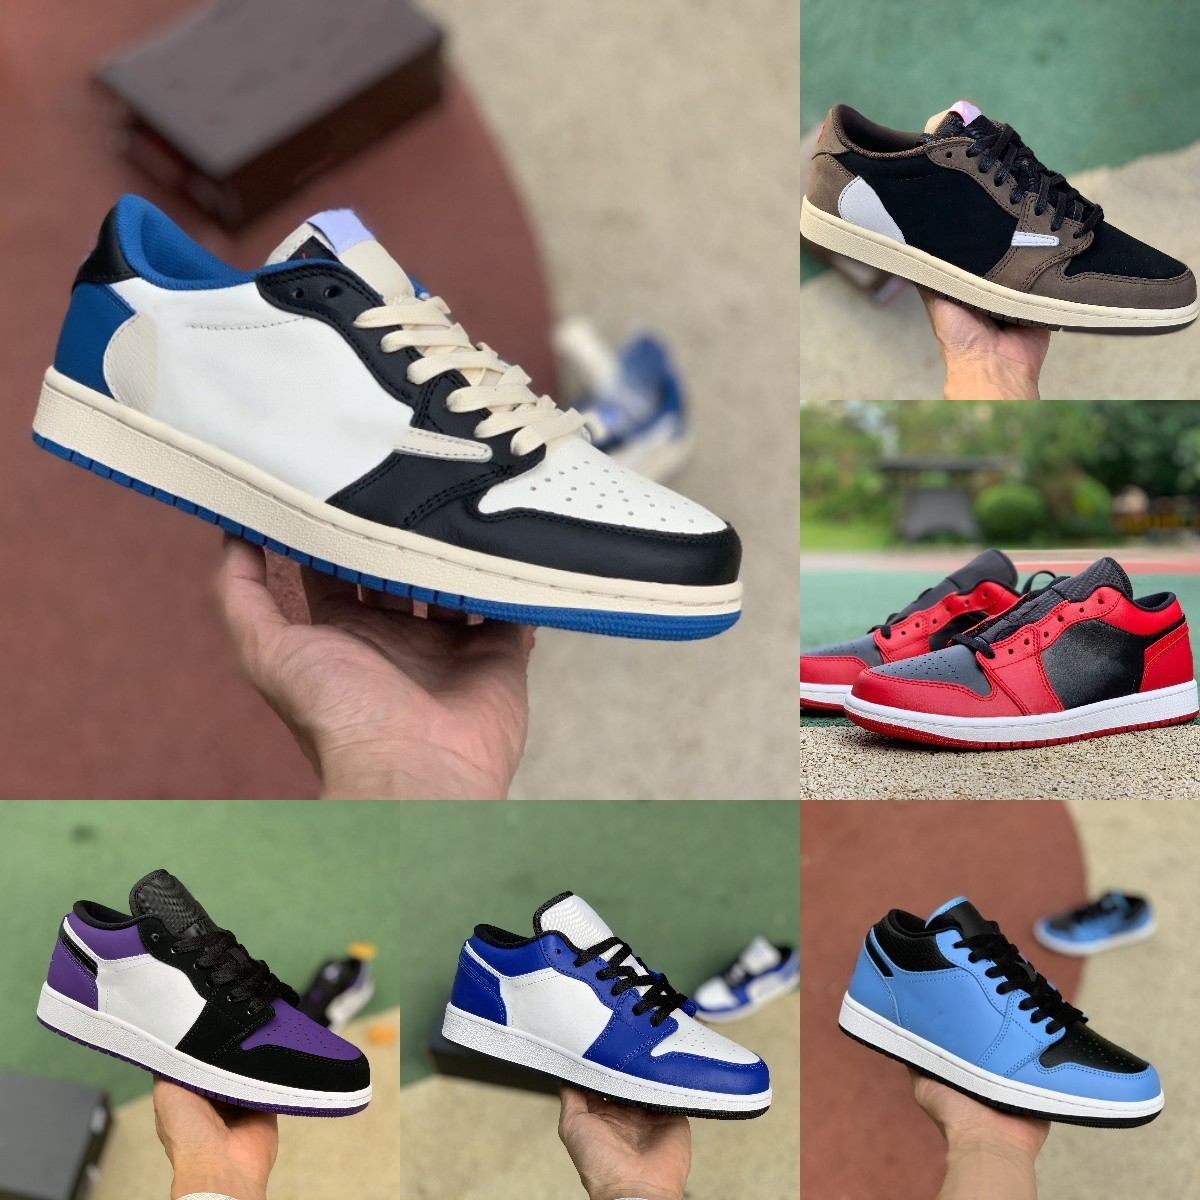 

2022 Jumpman X 1 1S Low Basketball Shoes Jorden Starfish White Brown Gold Banned UNC Court Purple Gold Black Toe Panda Emerald Noble Red Wolf Grey Designer Sneakers, Please contact us